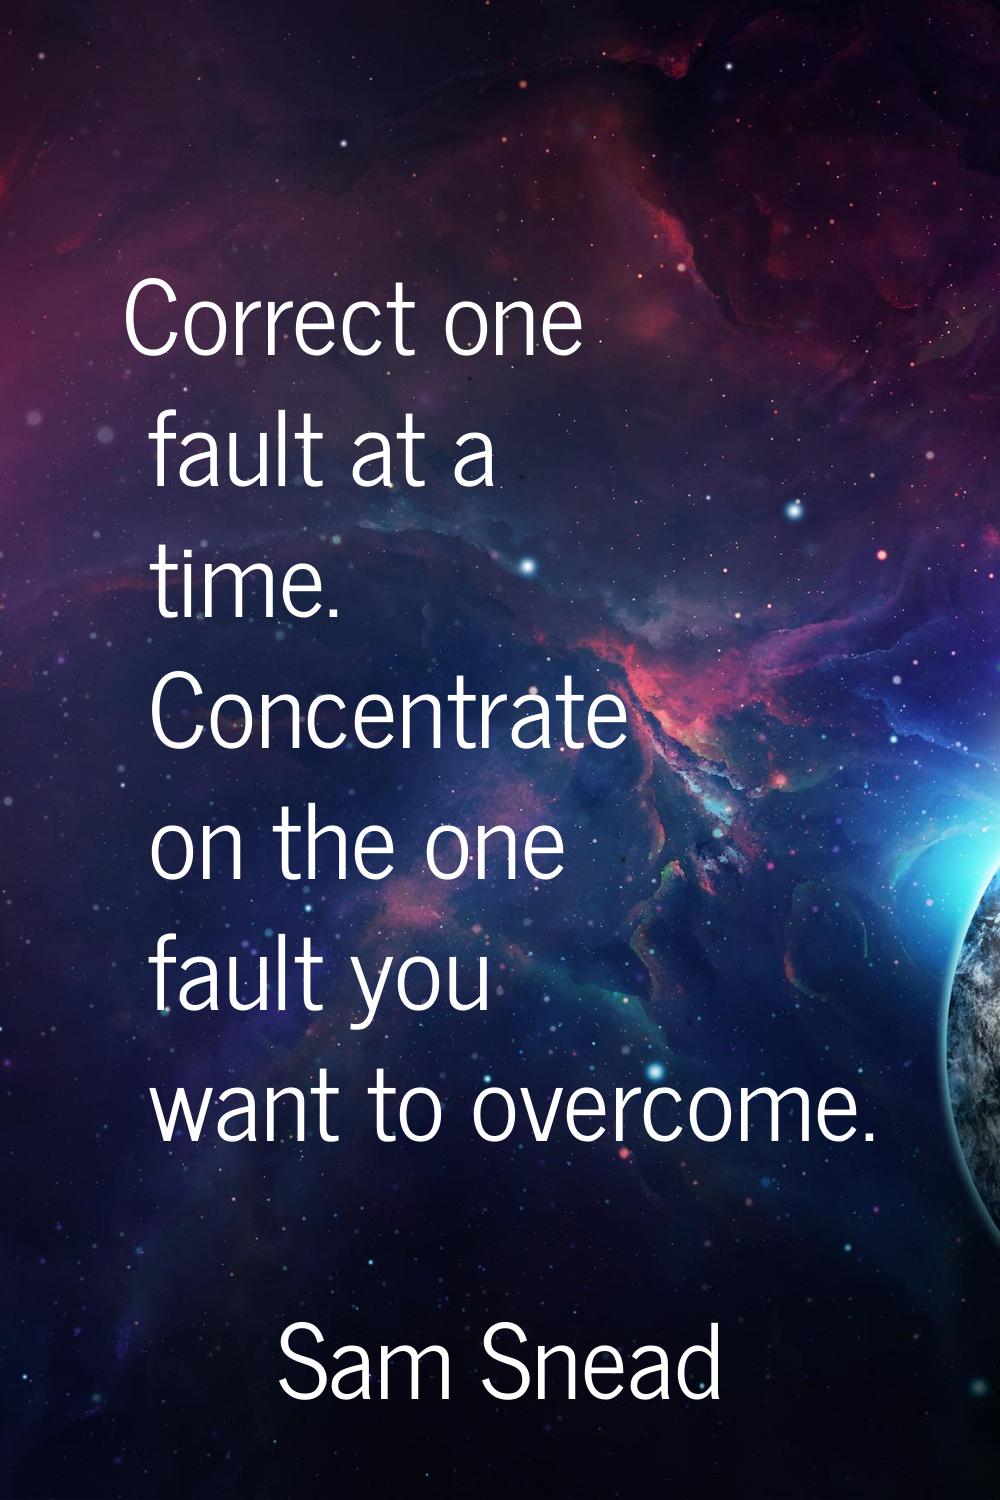 Correct one fault at a time. Concentrate on the one fault you want to overcome.